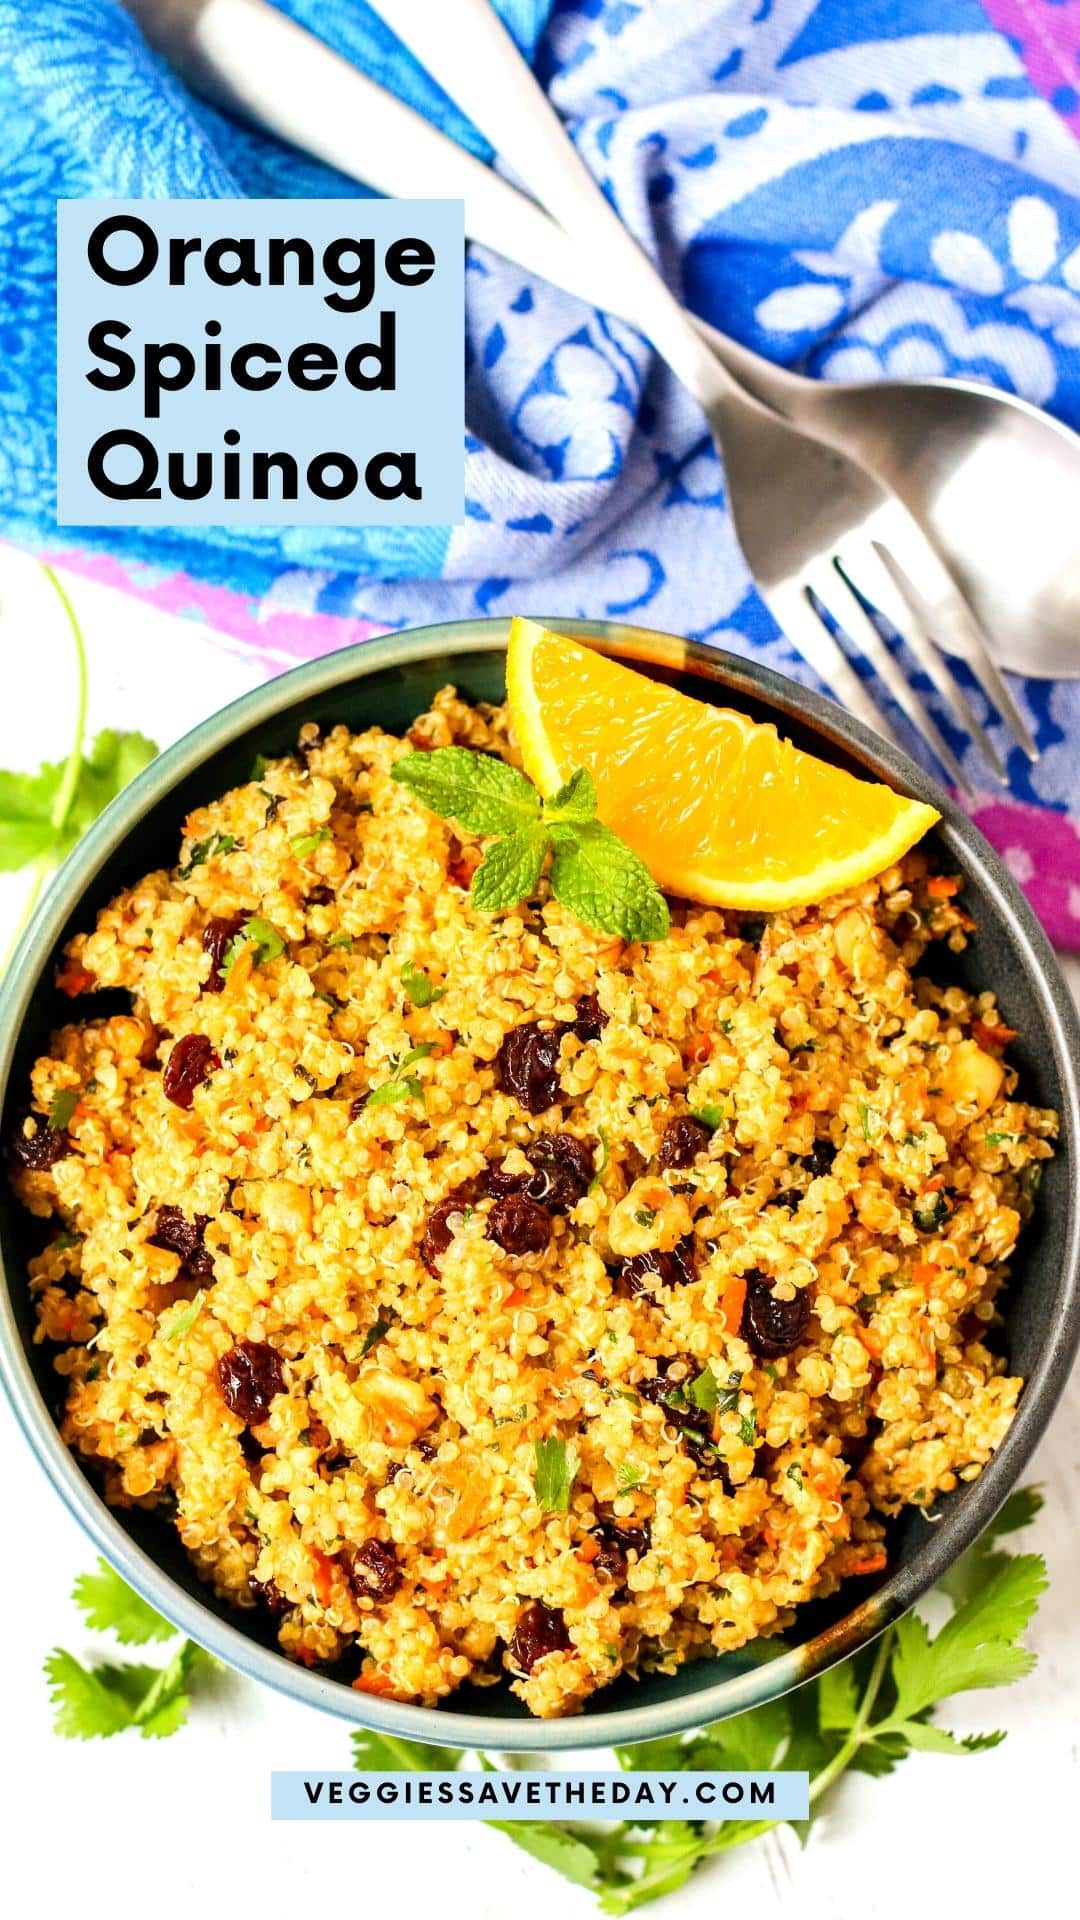 Bowl of spiced quinoa garnished with orange wedge and sprig of fresh mint.